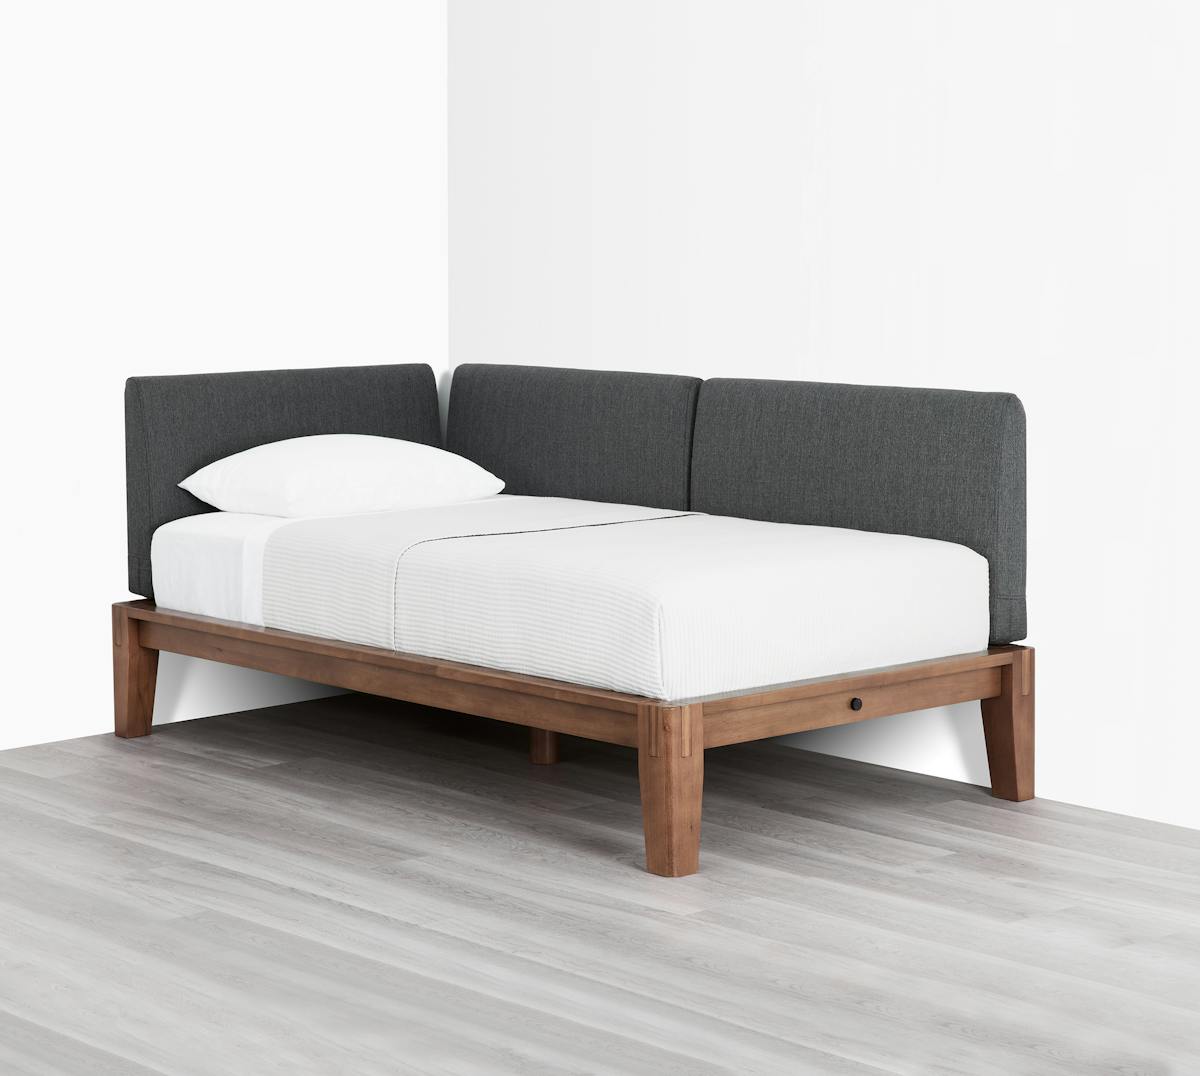 The Bed (Daybed / Walnut / Dark Charcoal) - Diagonal